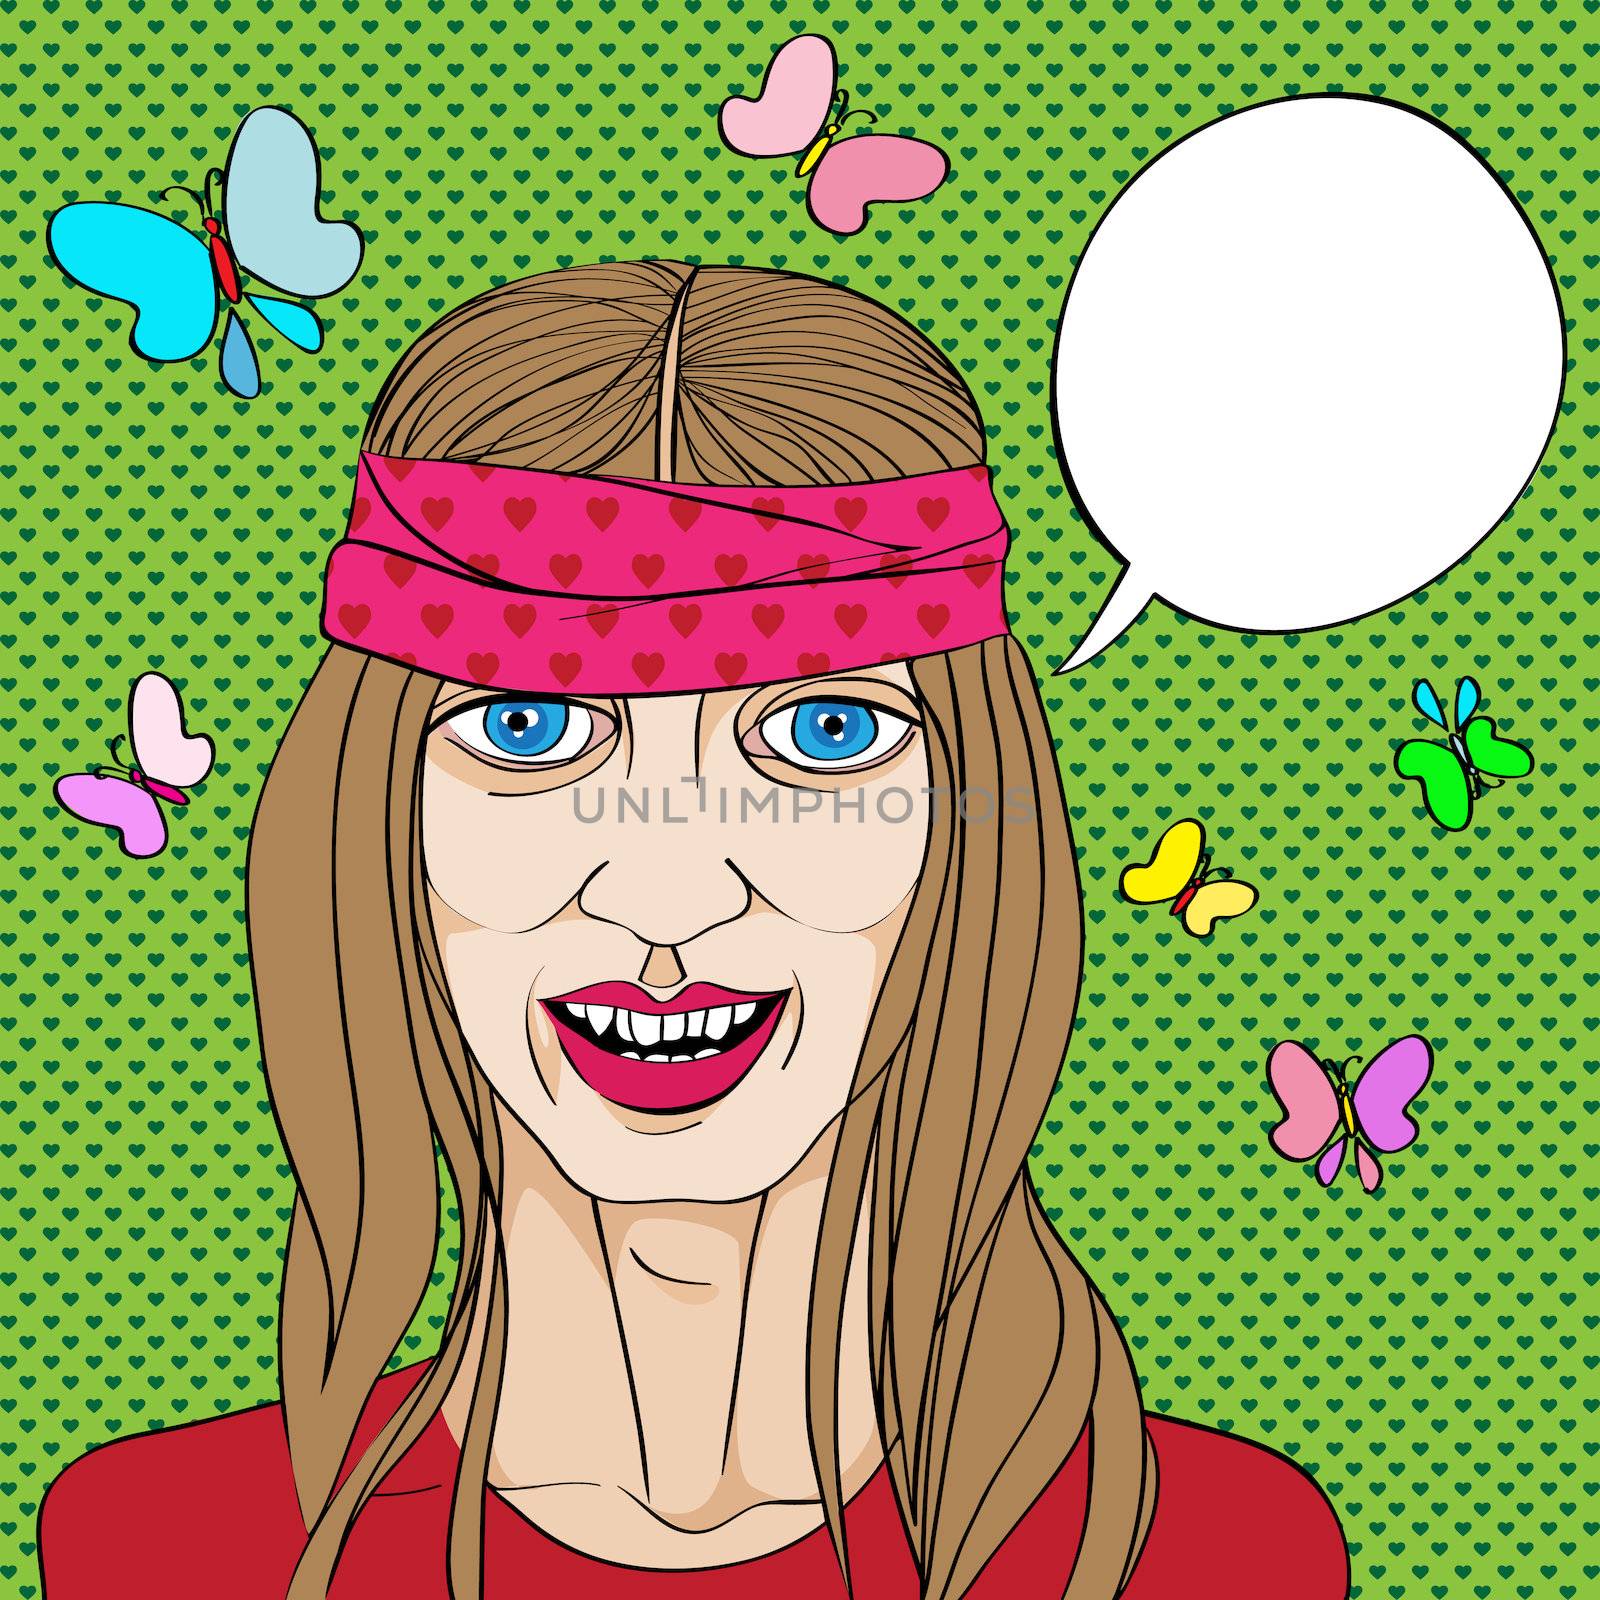 Multicolored illustration of a hippie blue eyes funny girl over a Pop art background with hearts, speech bubble and butterflies